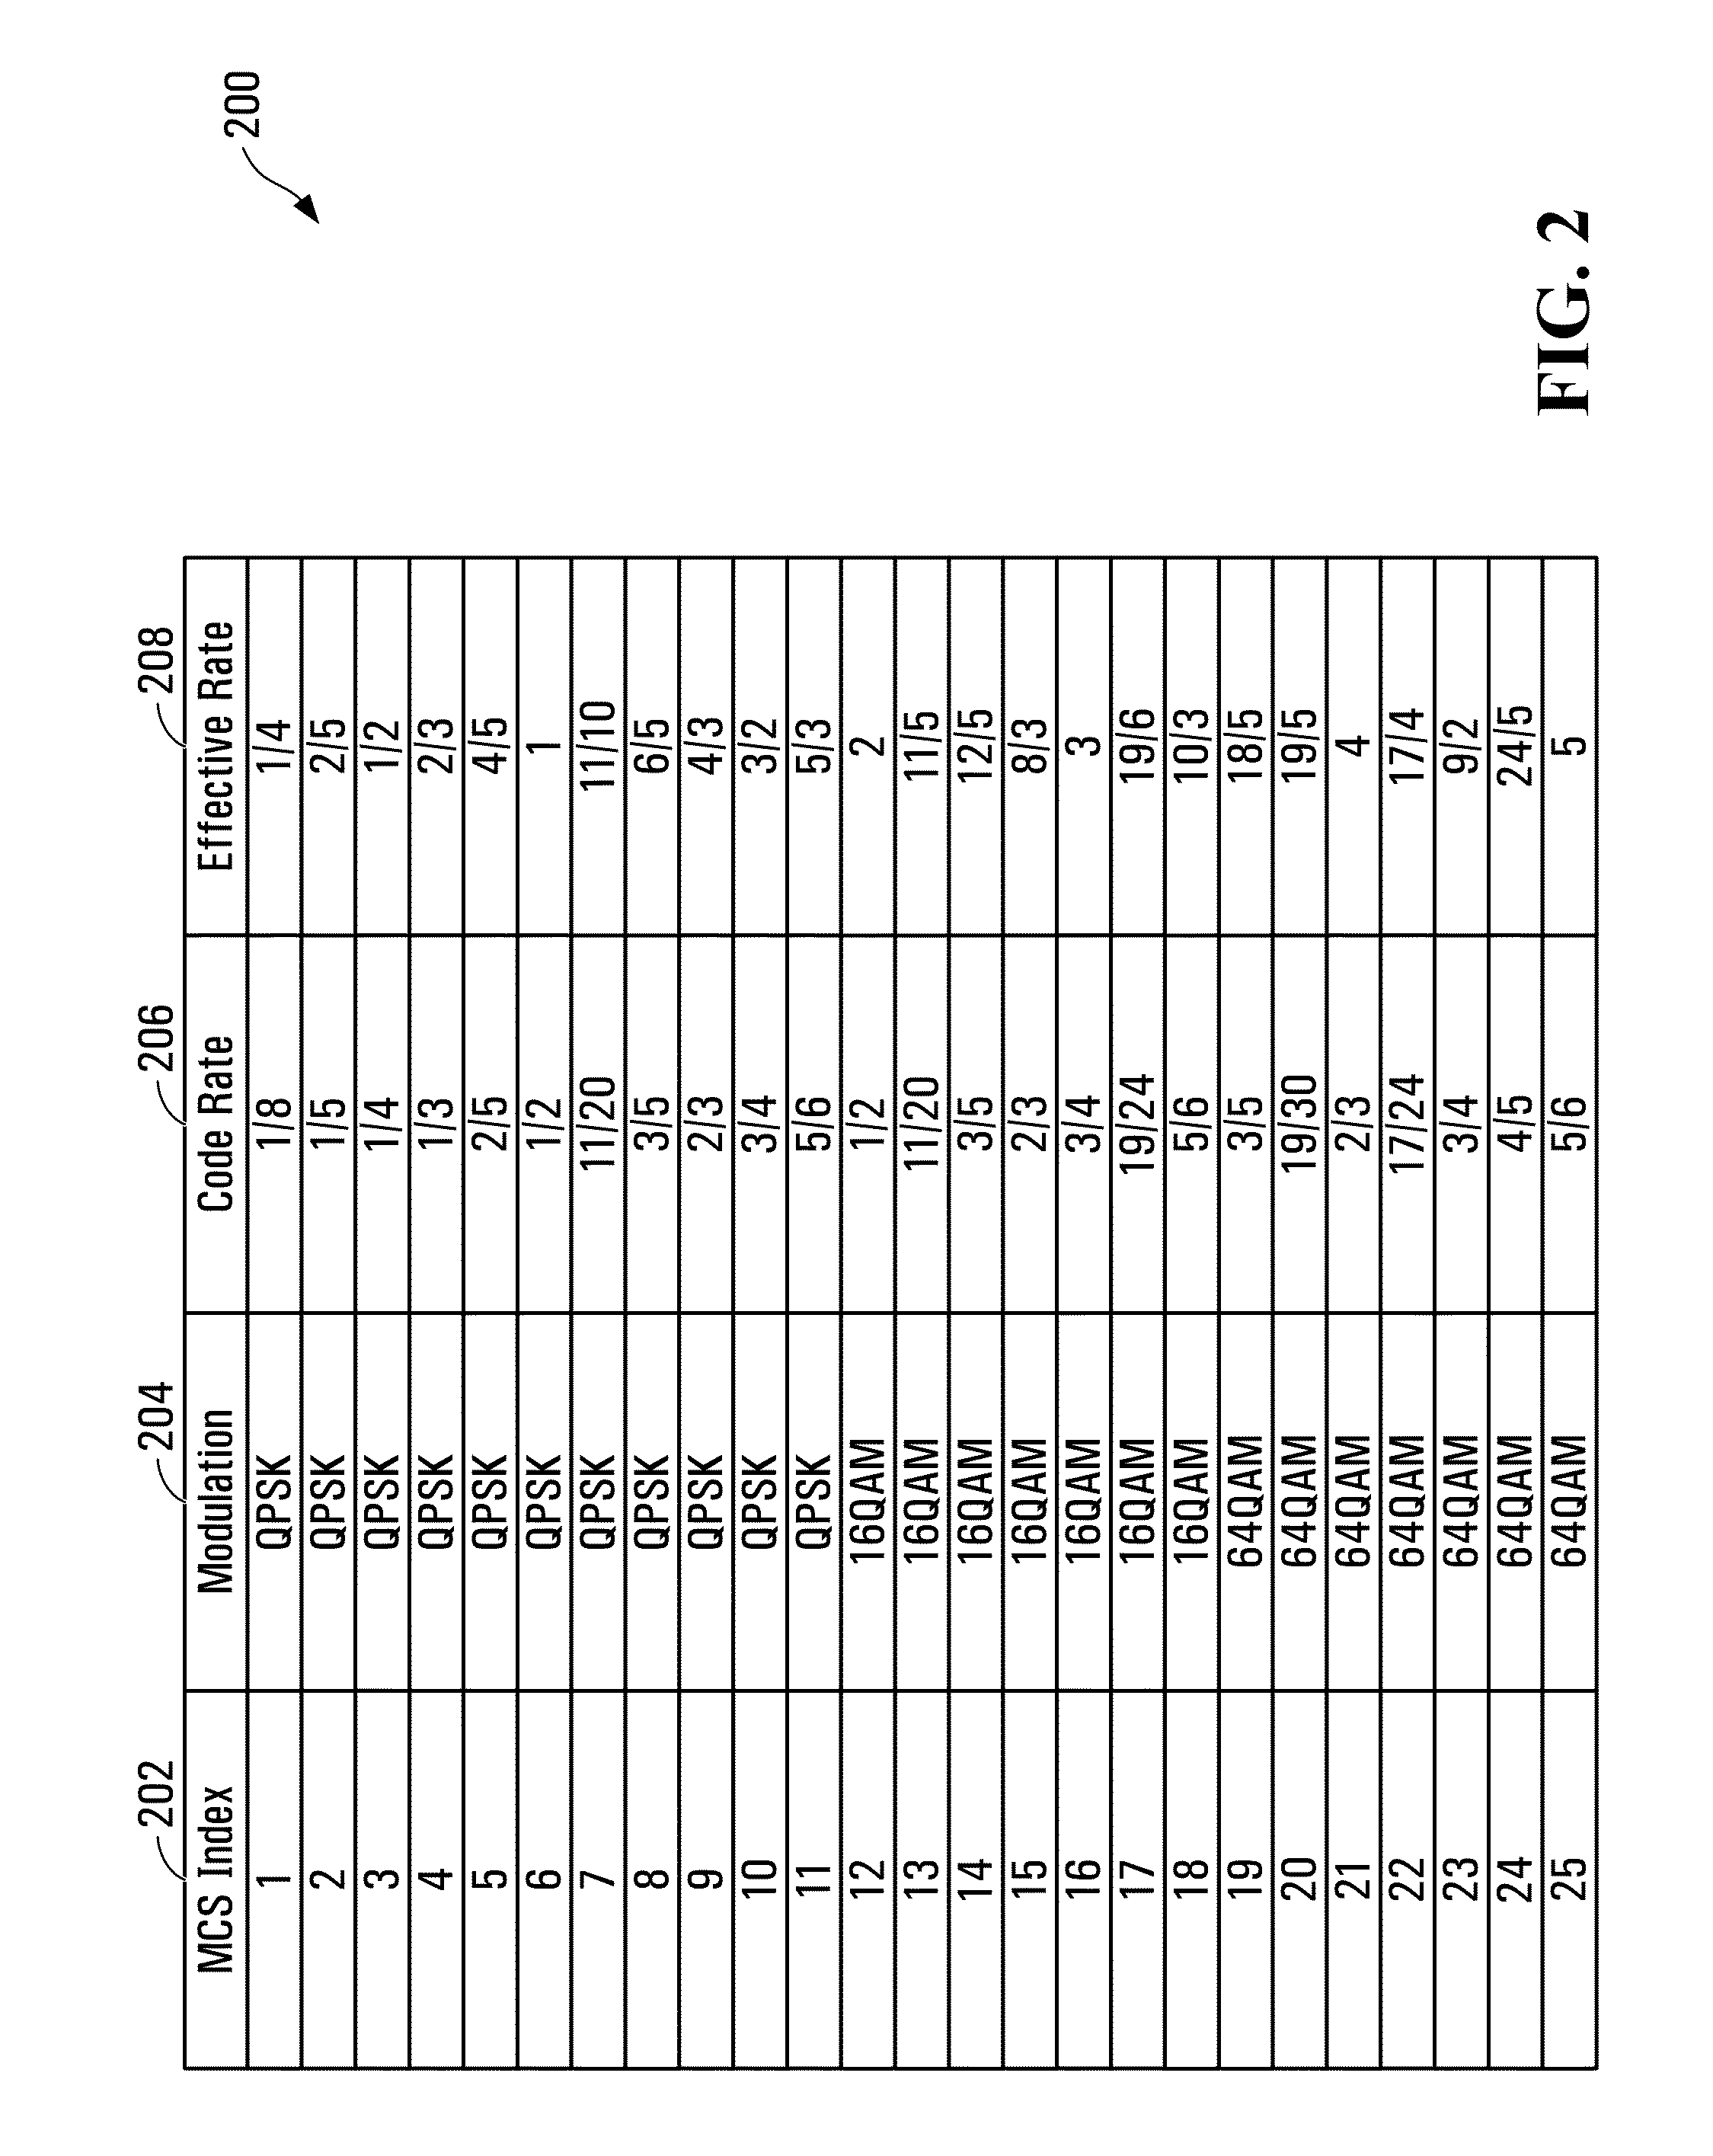 Channel quality indicator apparatus and method